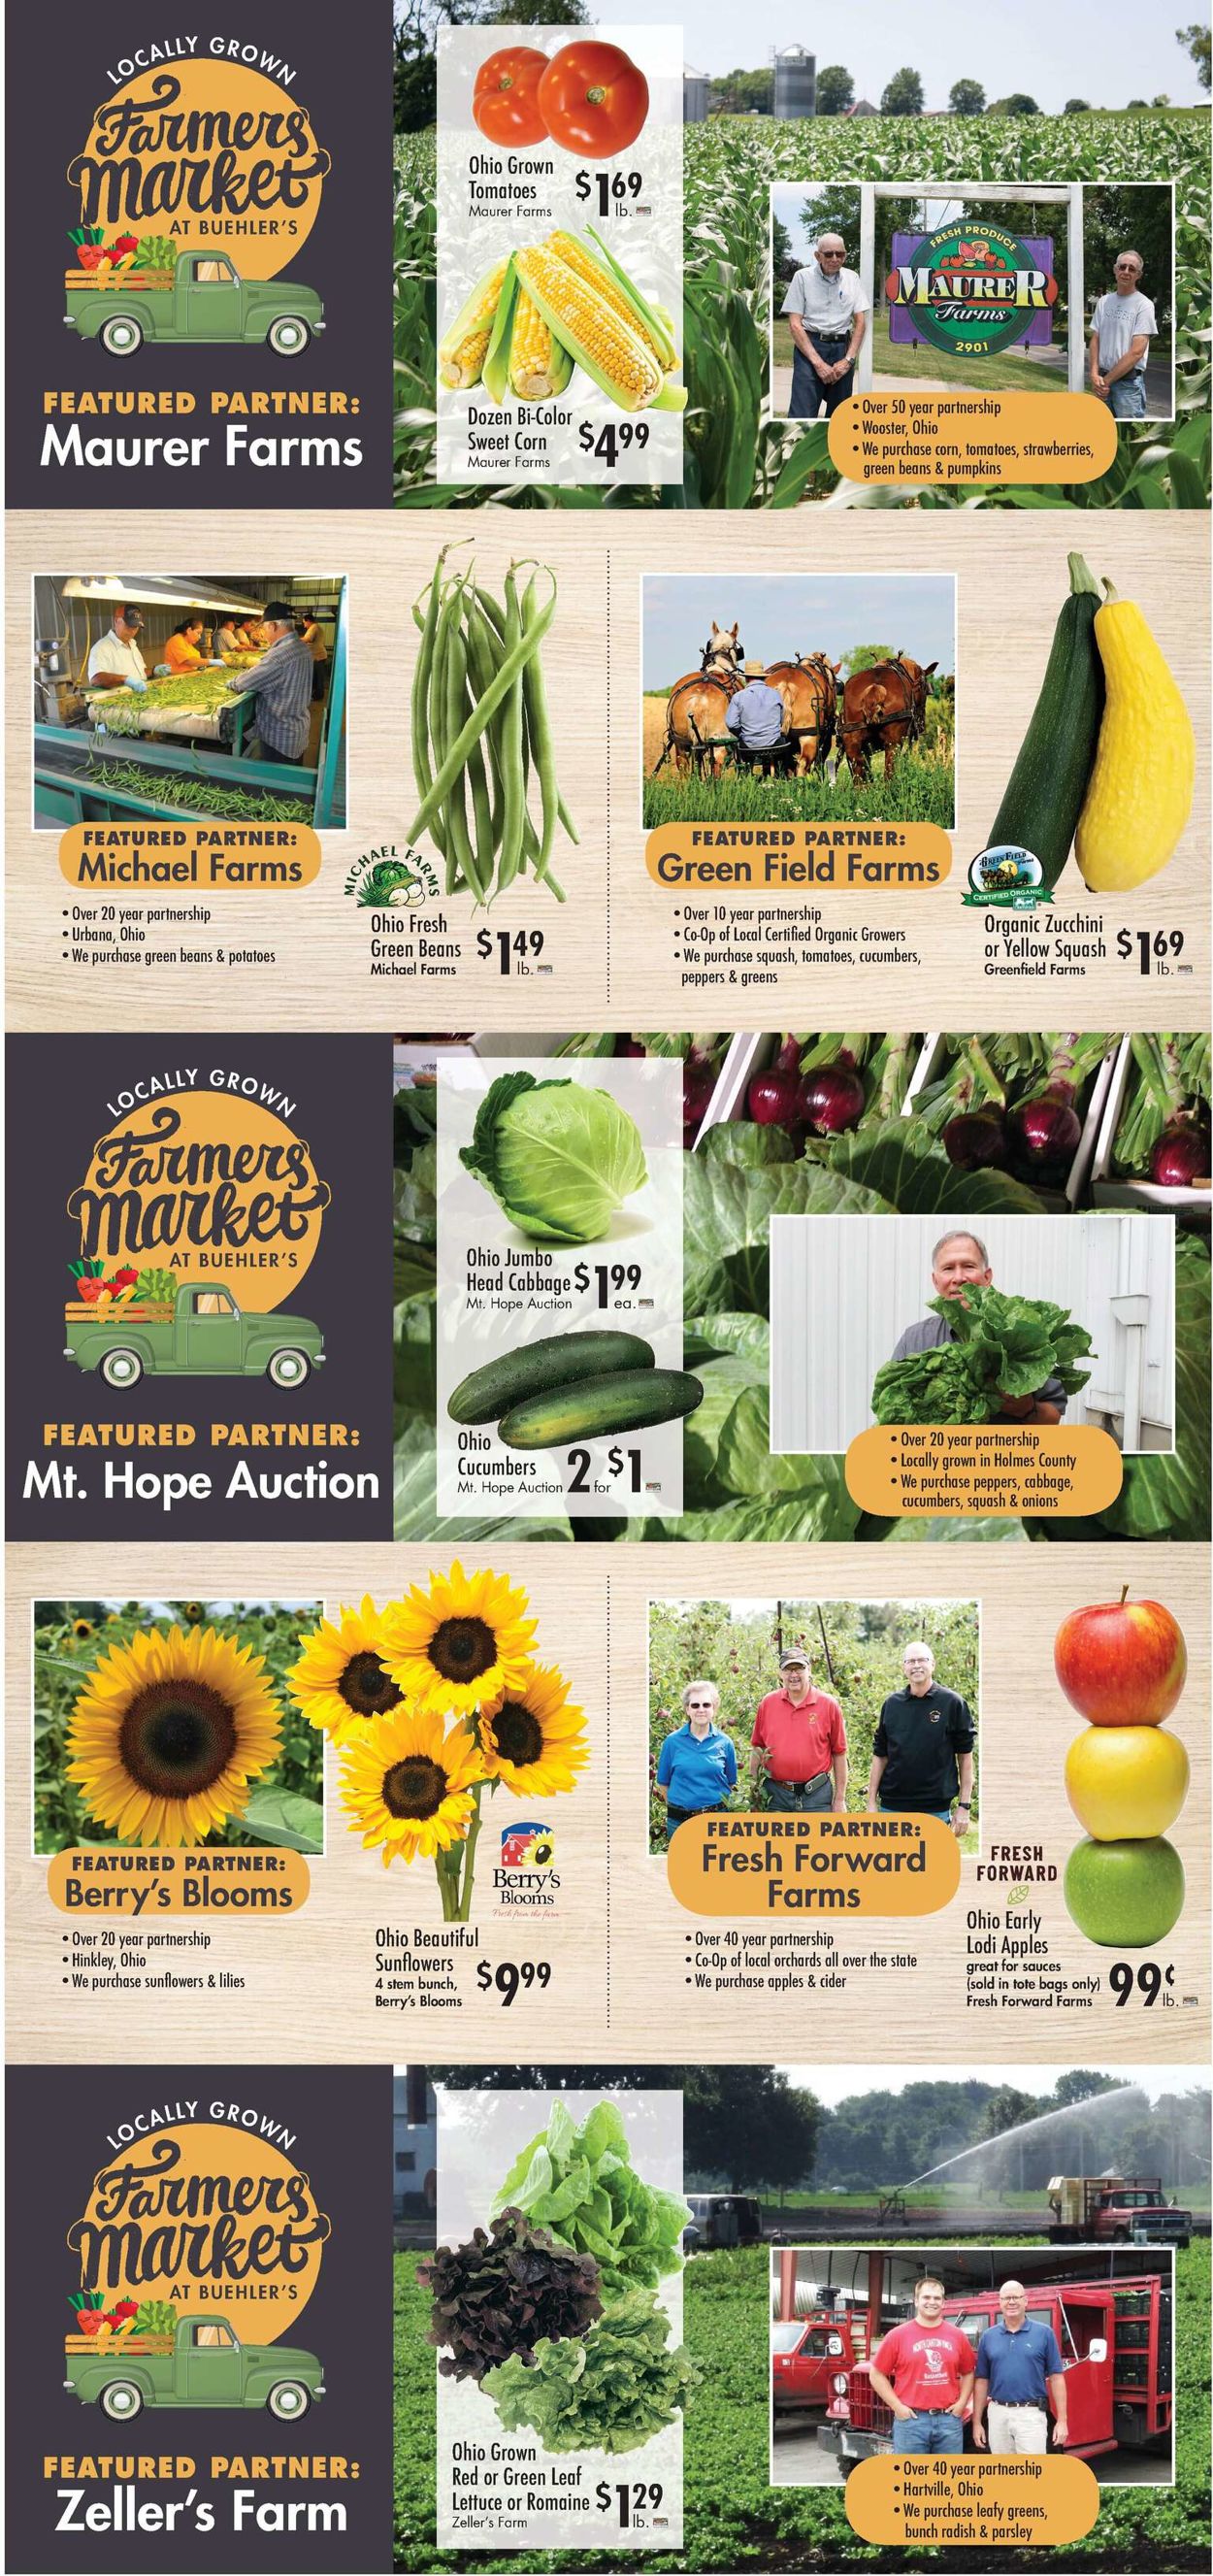 Catalogue Buehler's Fresh Foods from 08/03/2022